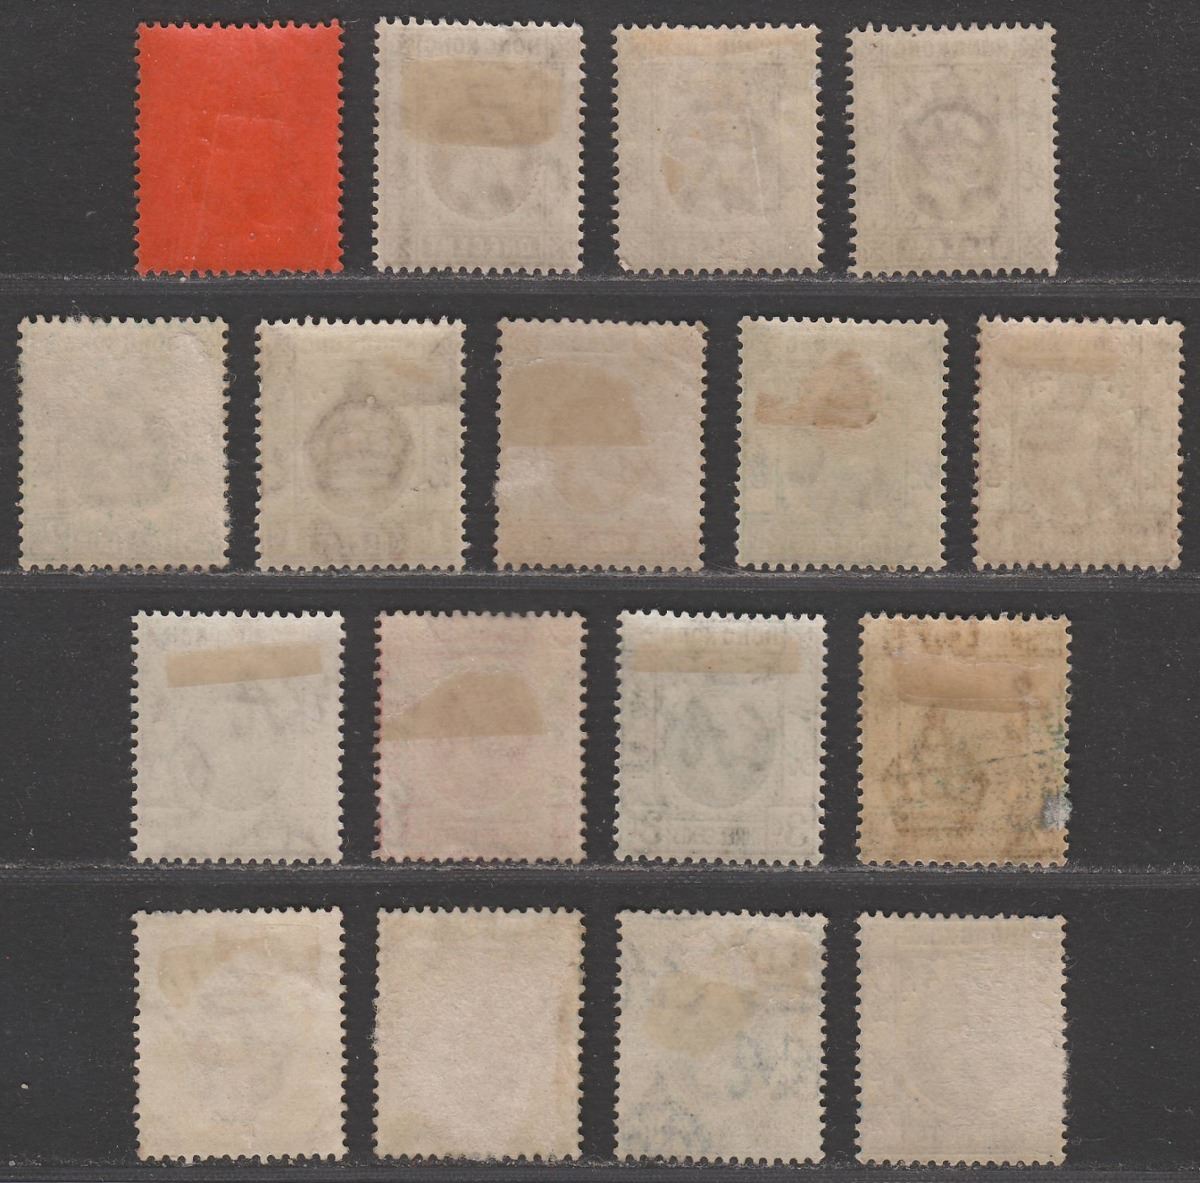 Hong Kong 1903-21 KEVII-KGV Selection to 30c Mostly Mint